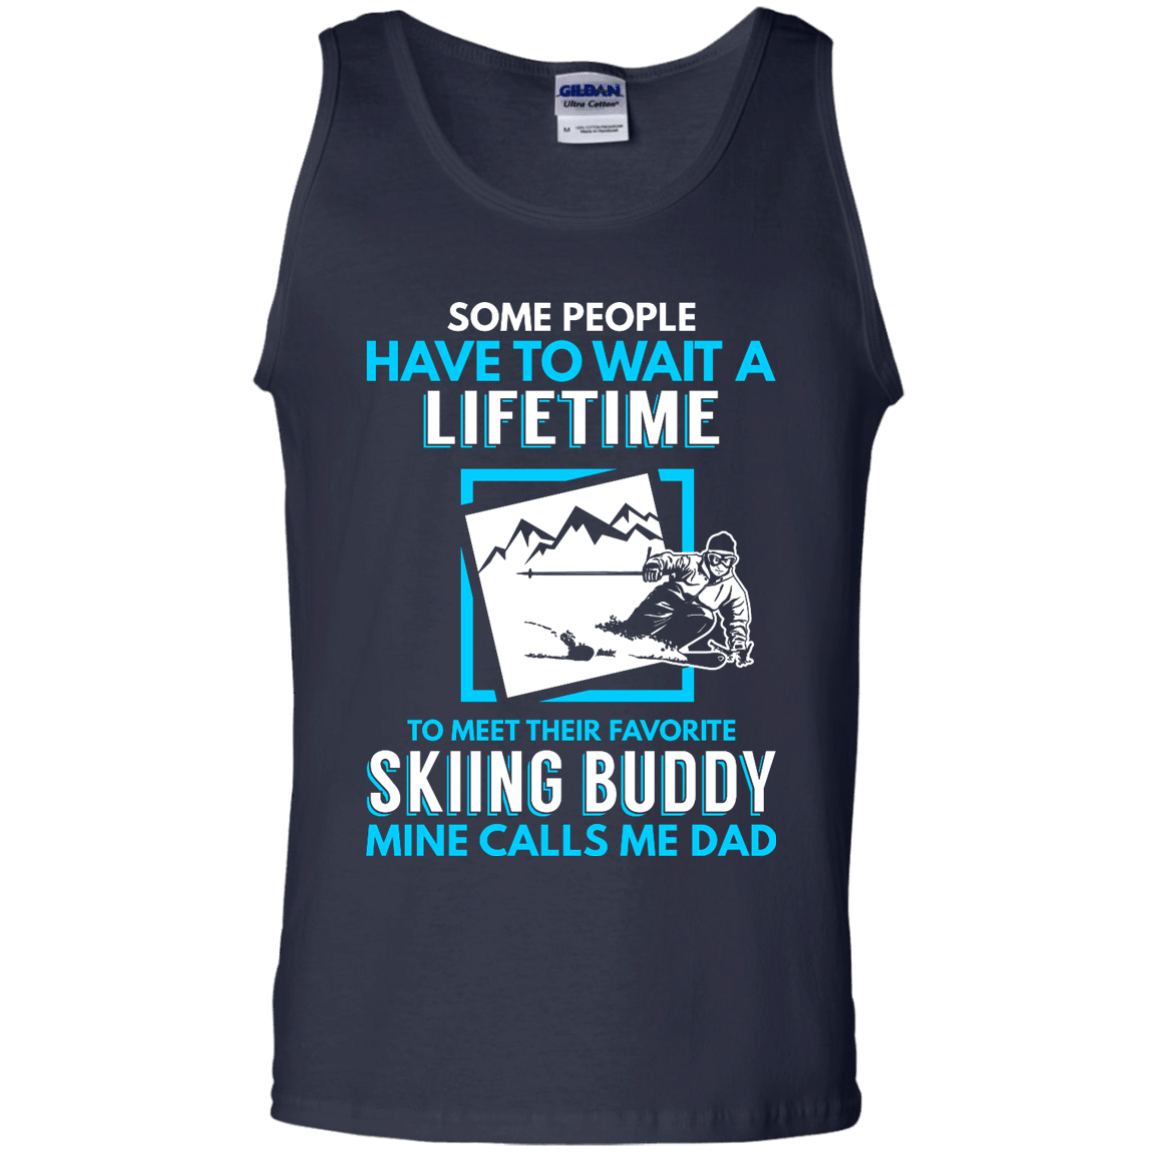 Some People Have To Wait A Lifetime To Meet Their Their Favorite Skiing Buddy Mine Calls Me Dad - Tank Tops - Powderaddicts